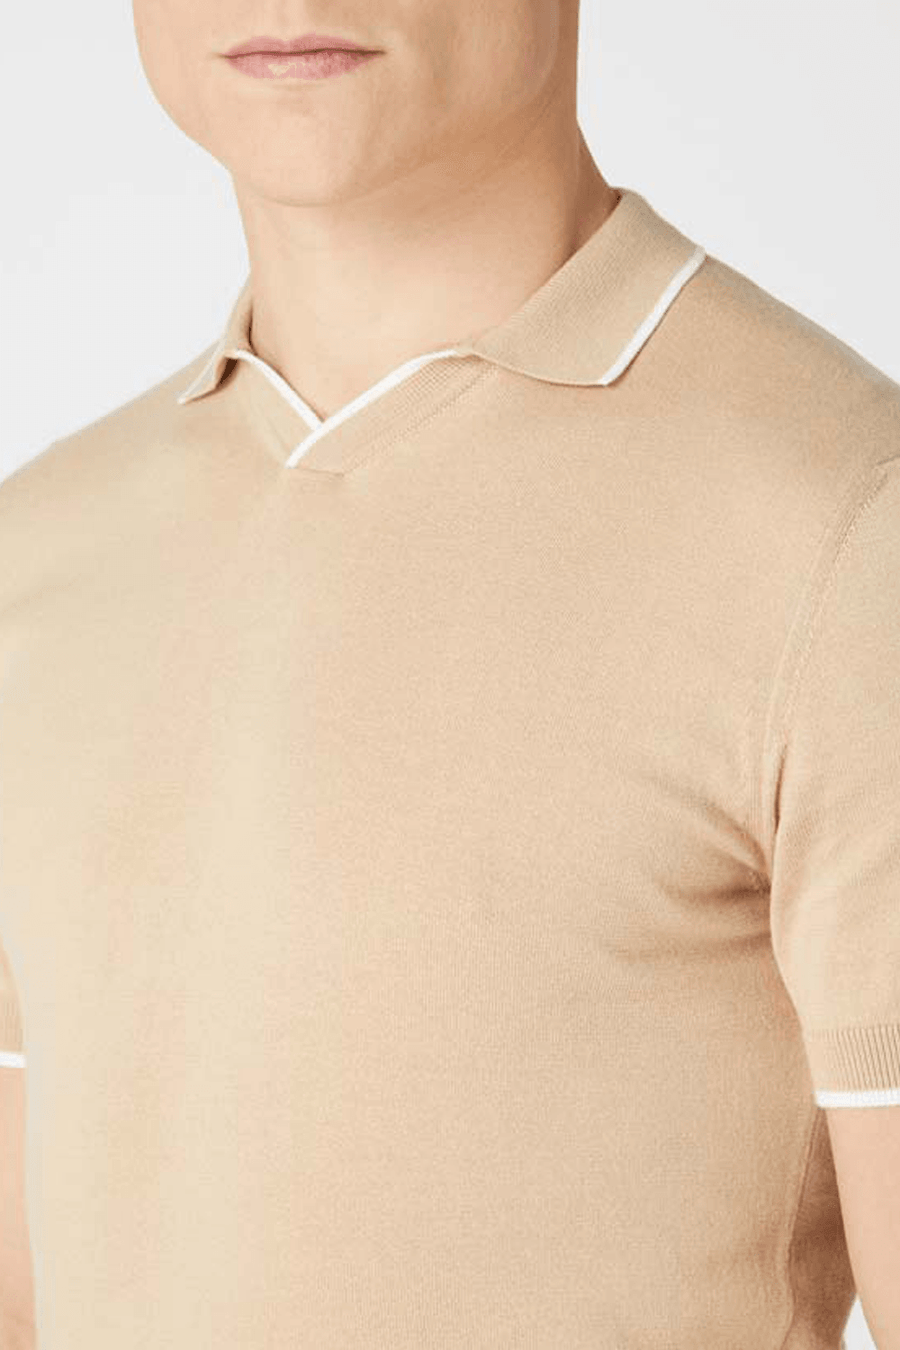 Buy the Remus Uomo S/S Open Collar Polo in Beige at Intro. Spend £50 for free UK delivery. Official stockists. We ship worldwide.